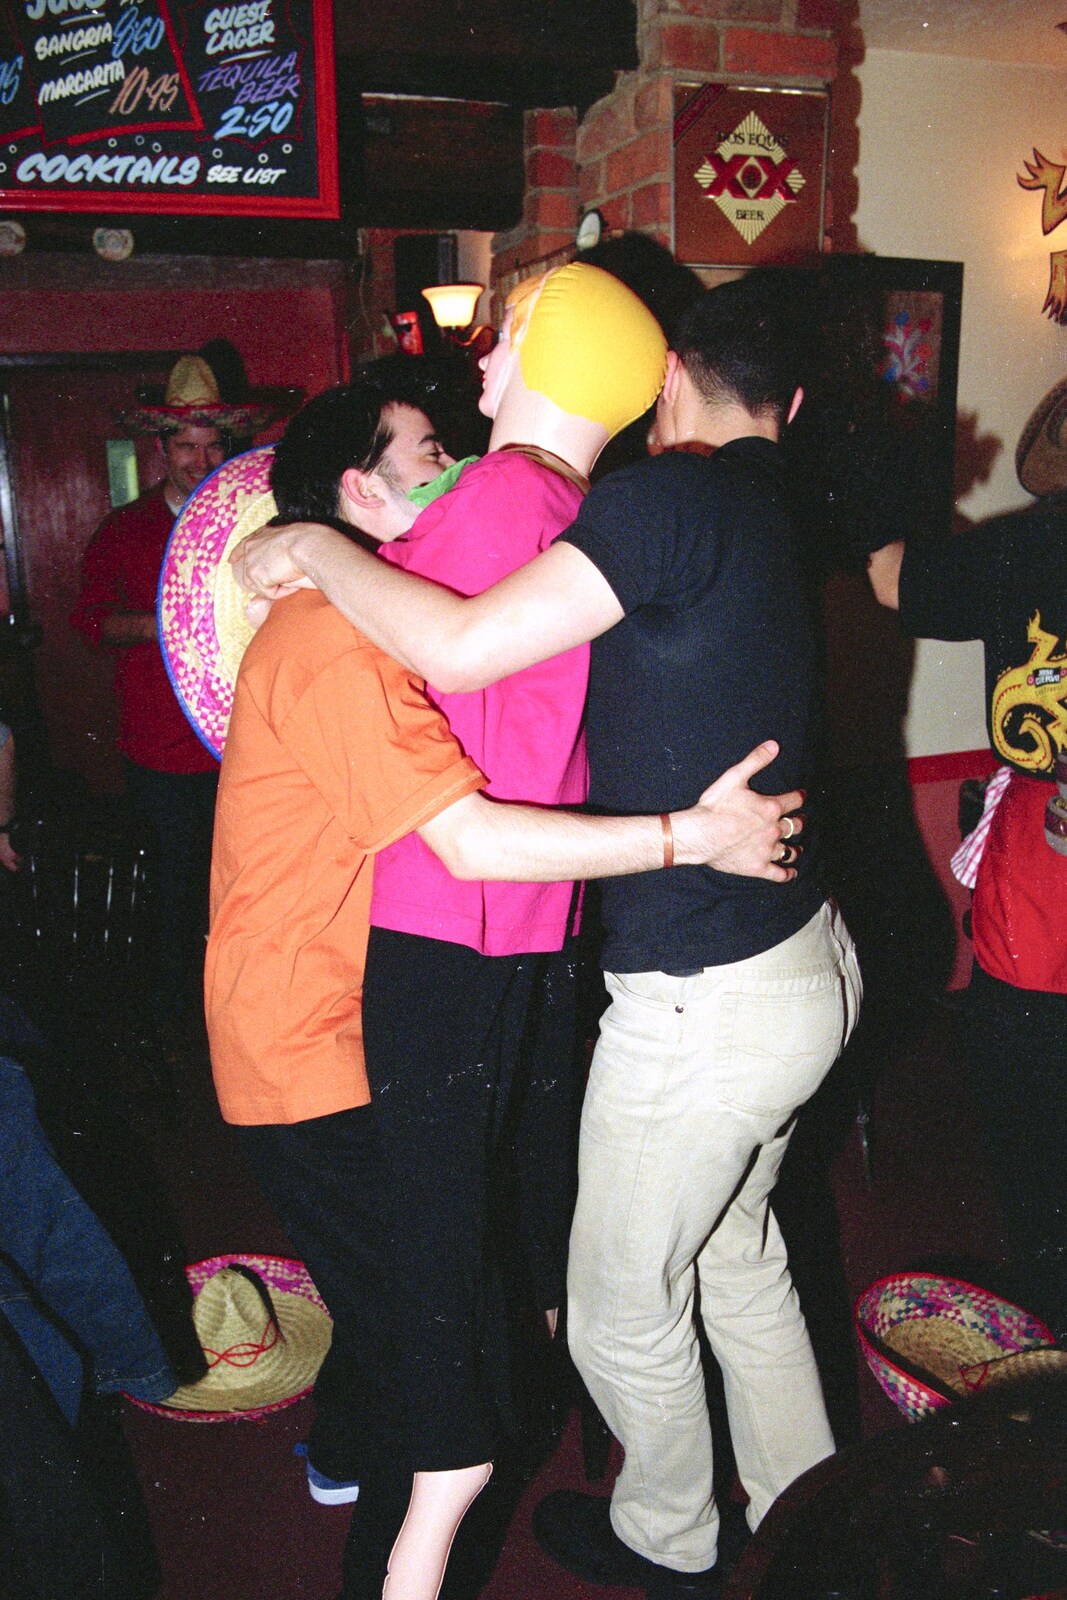 CISU, Los Mexicanos and the Inflatable Woman, Ipswich, Suffolk - 25th April 1996: A group hug